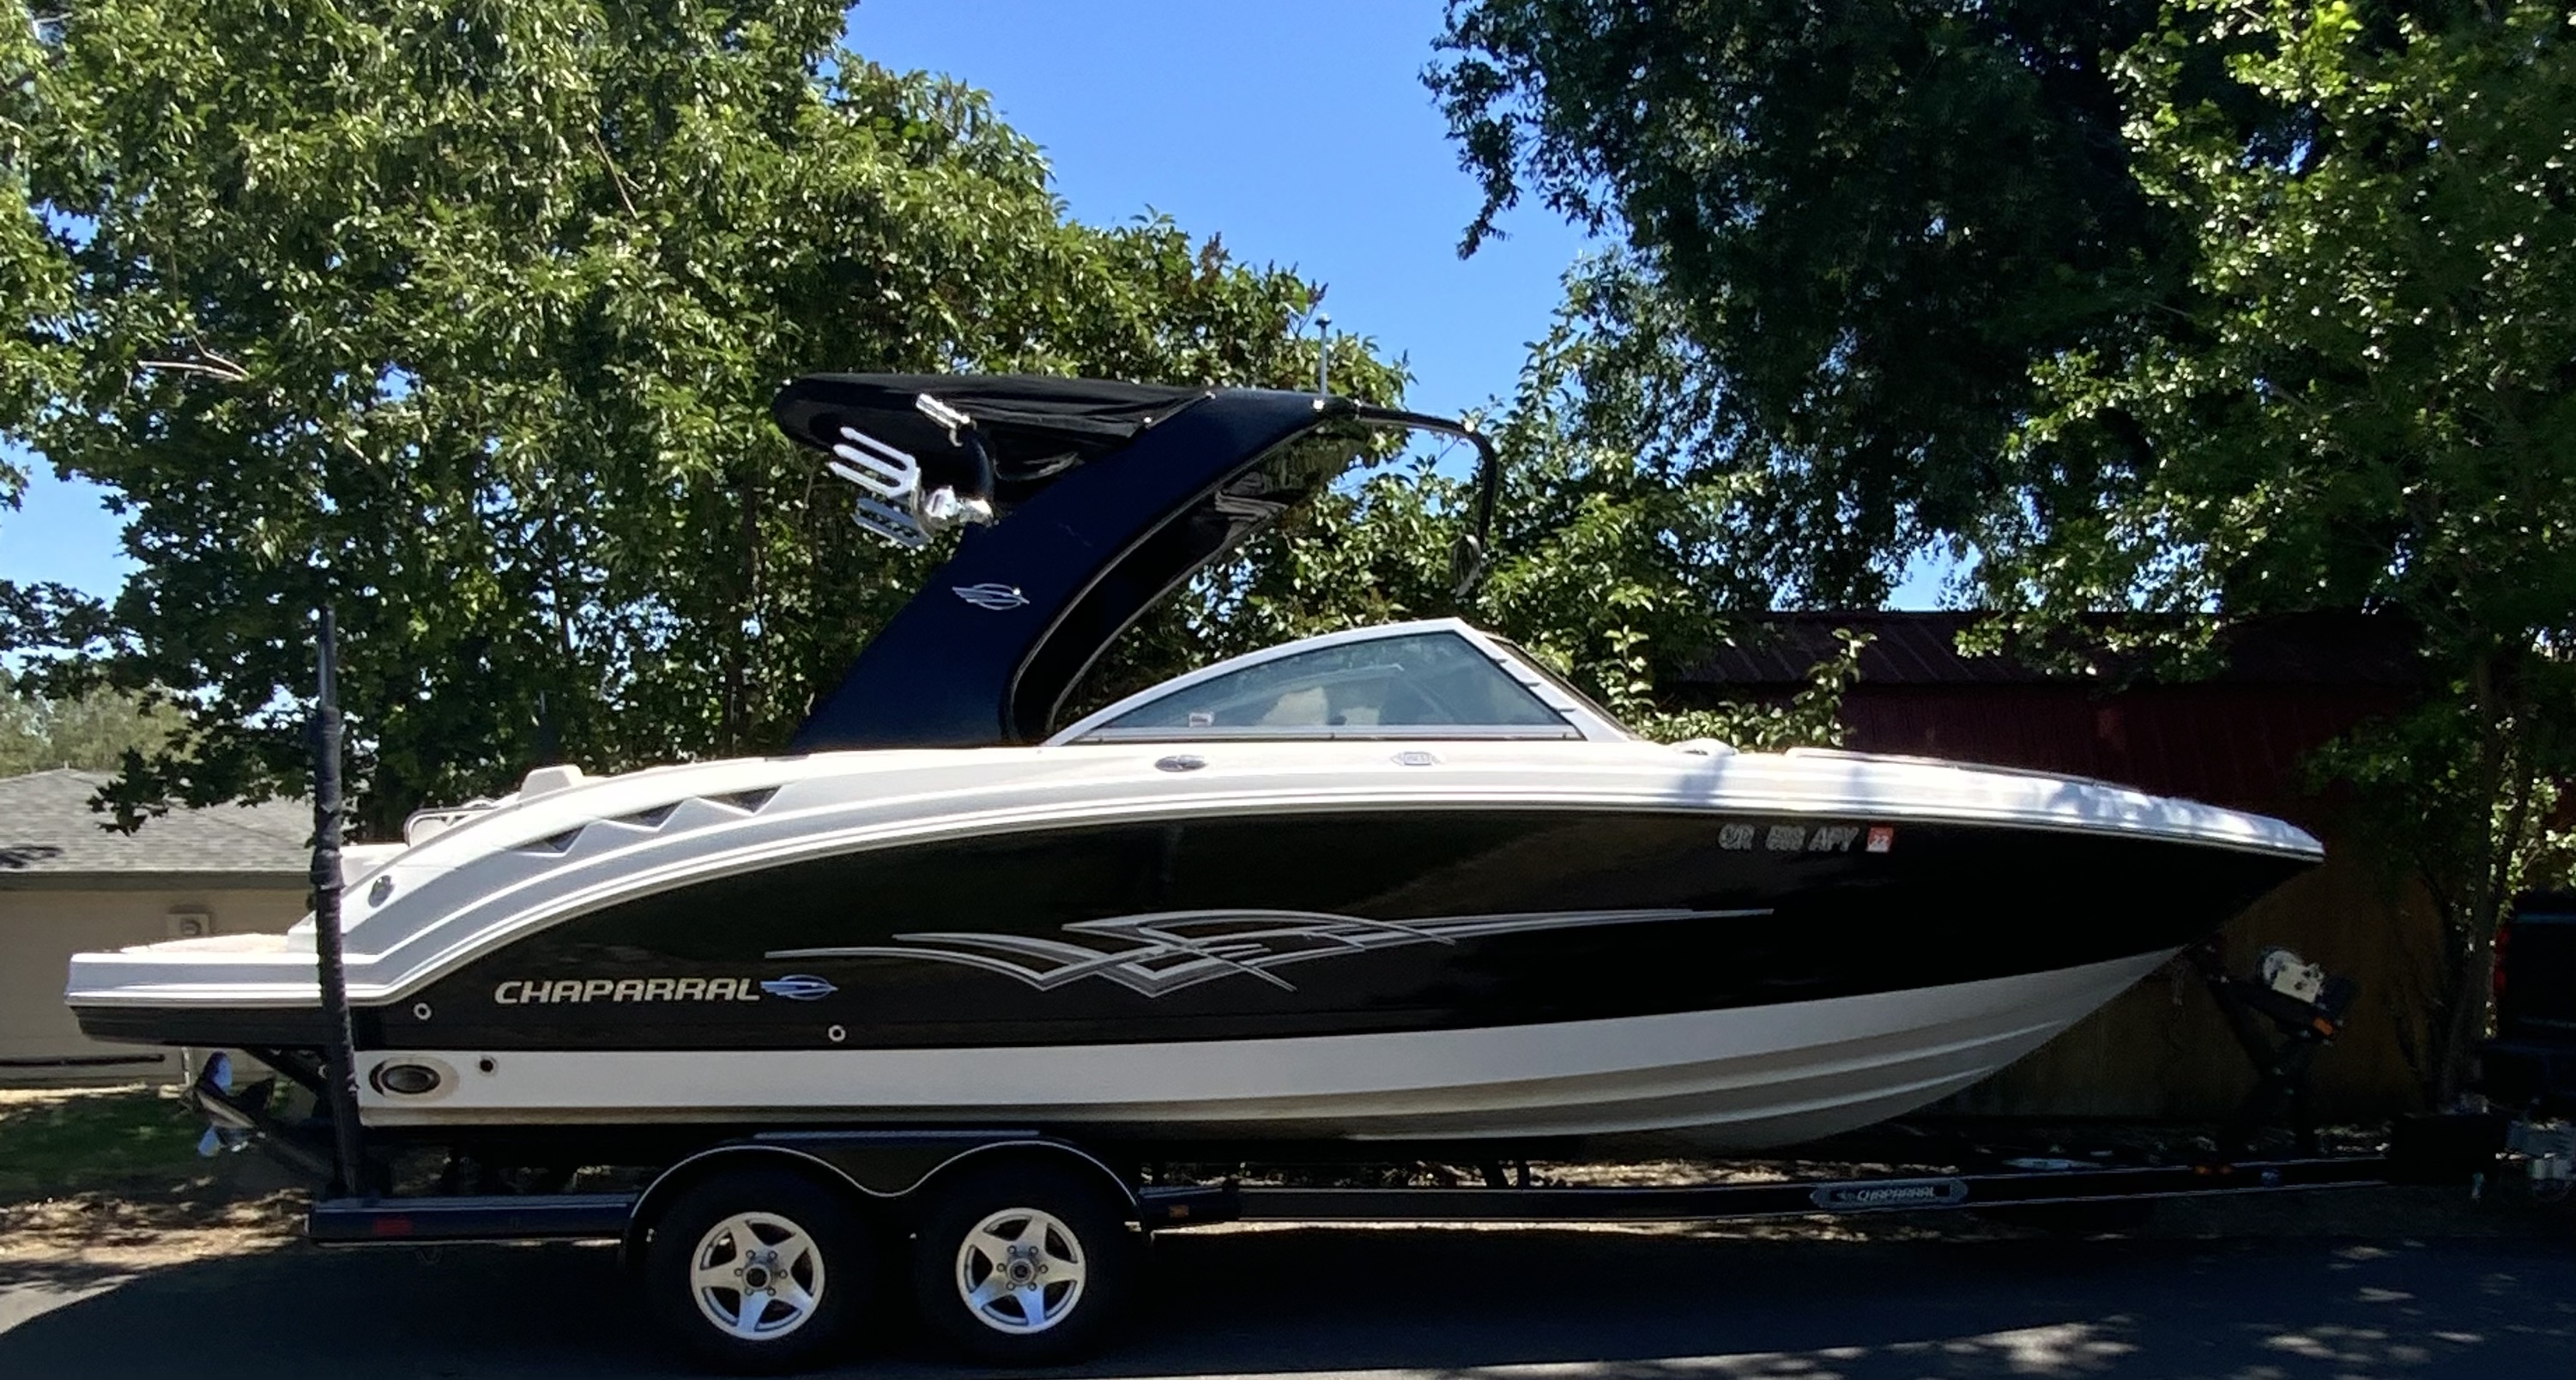 2008 Chaparral 264 Sunesta Power boat for sale in Hermiston, OR - image 1 